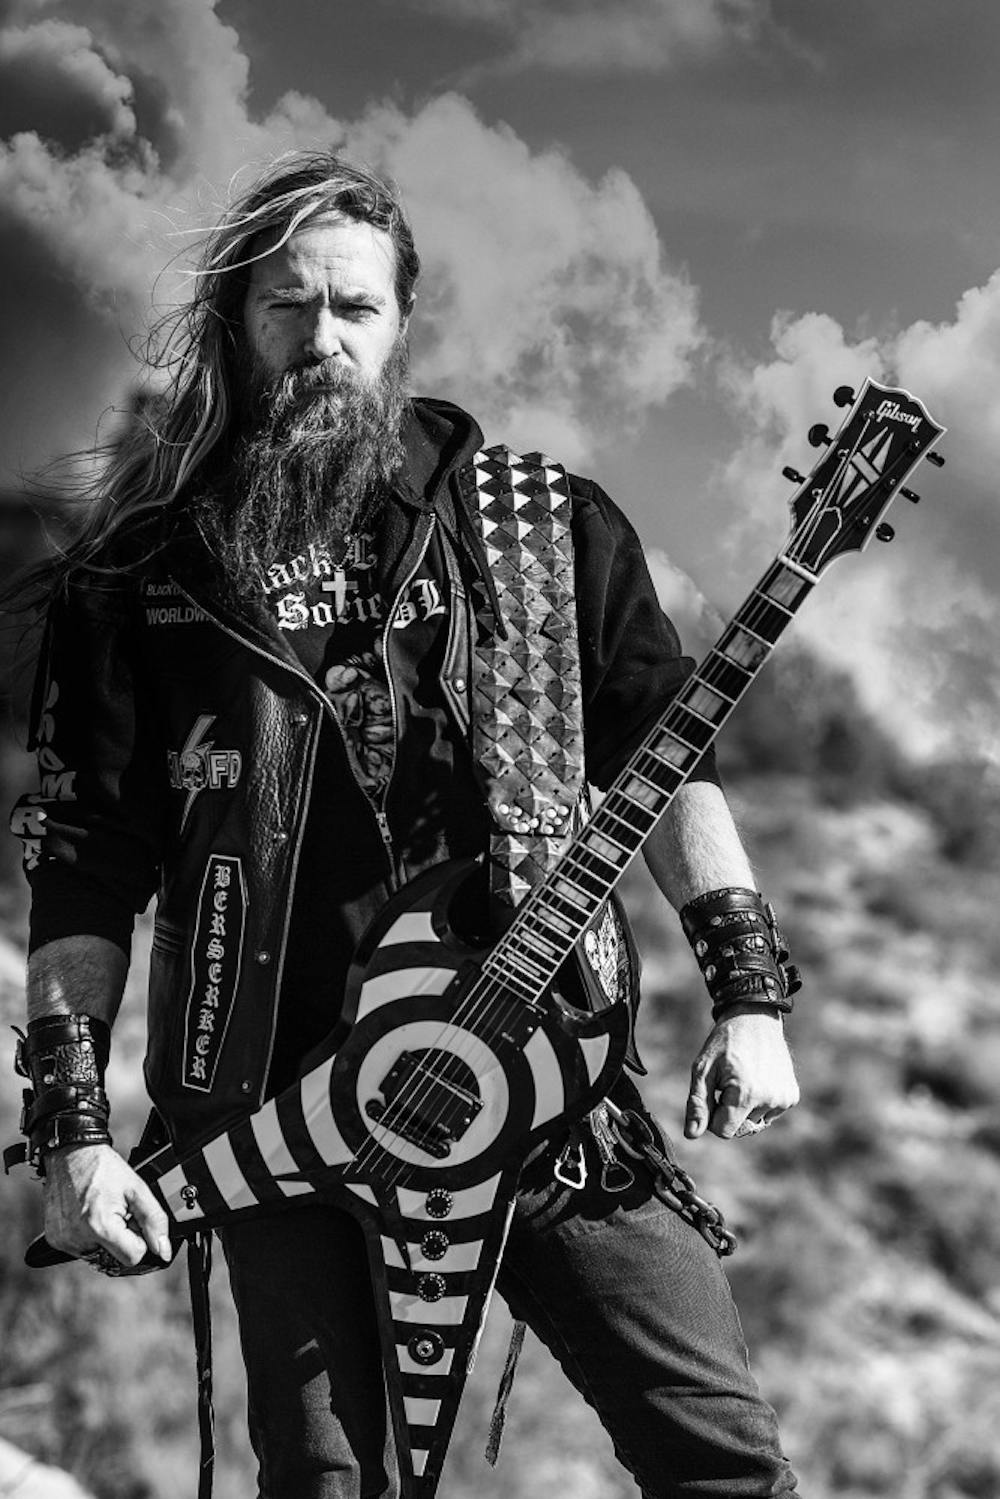 	Zakk Wylde and his band, Black Label Society, performed at Albuquerque’s Sunshine Theater on Aug. 4.